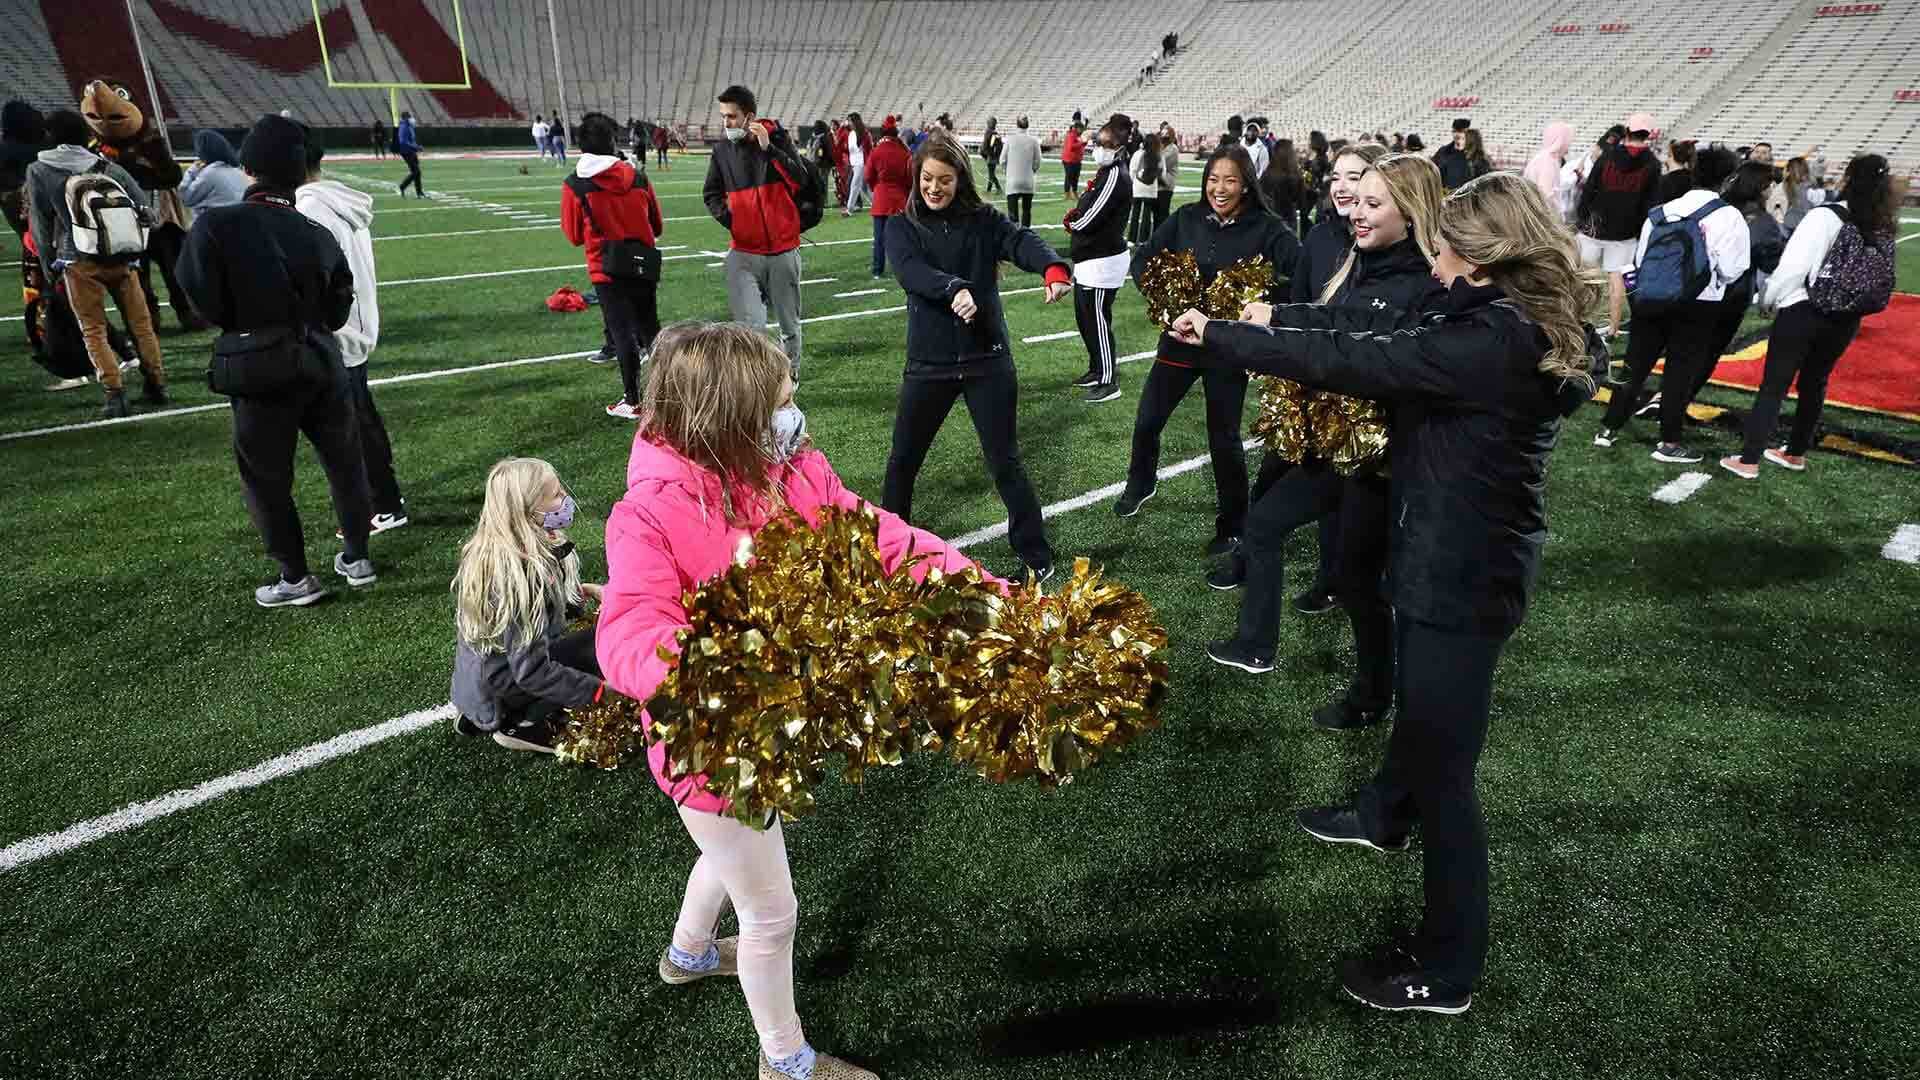 UMD cheerleaders demonstrate their moves to young fans at Tuesday Night Lights event at football stadium